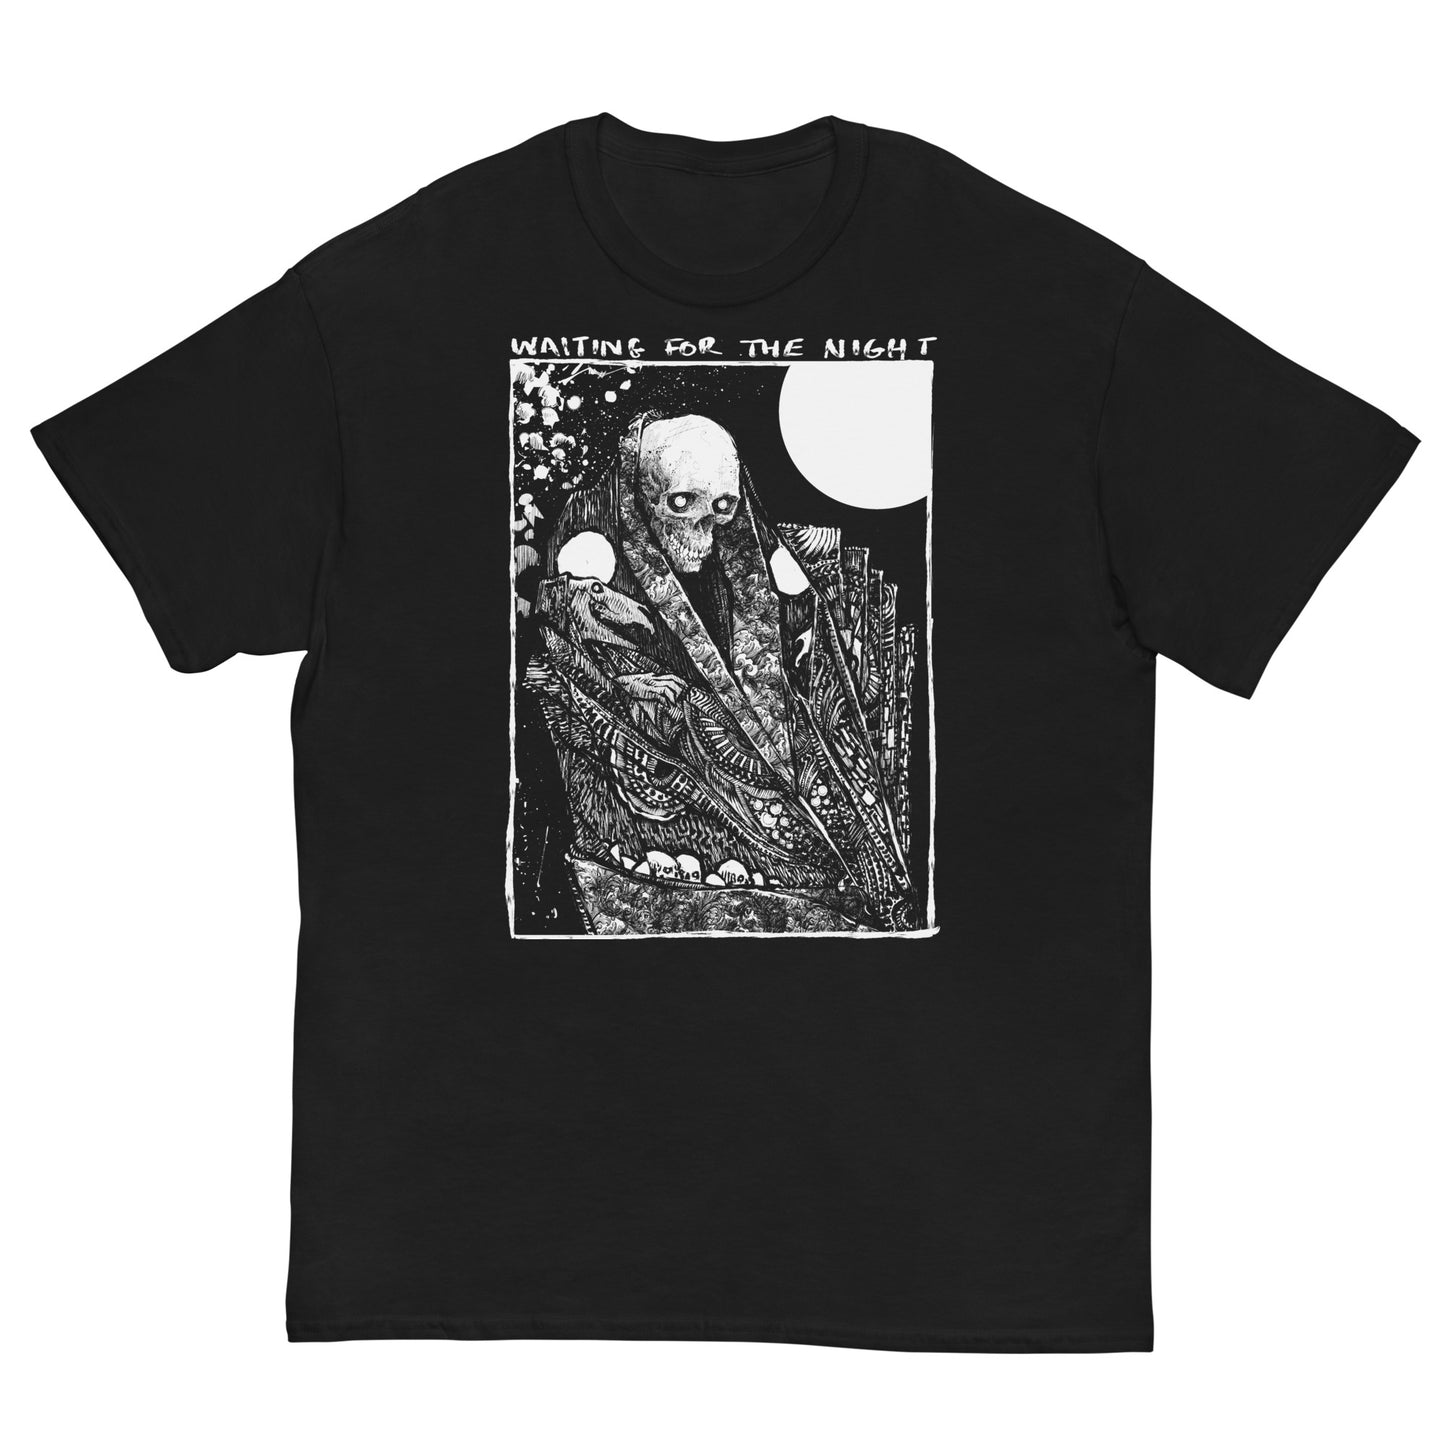 Waiting For The Night Unisex T-Shirt